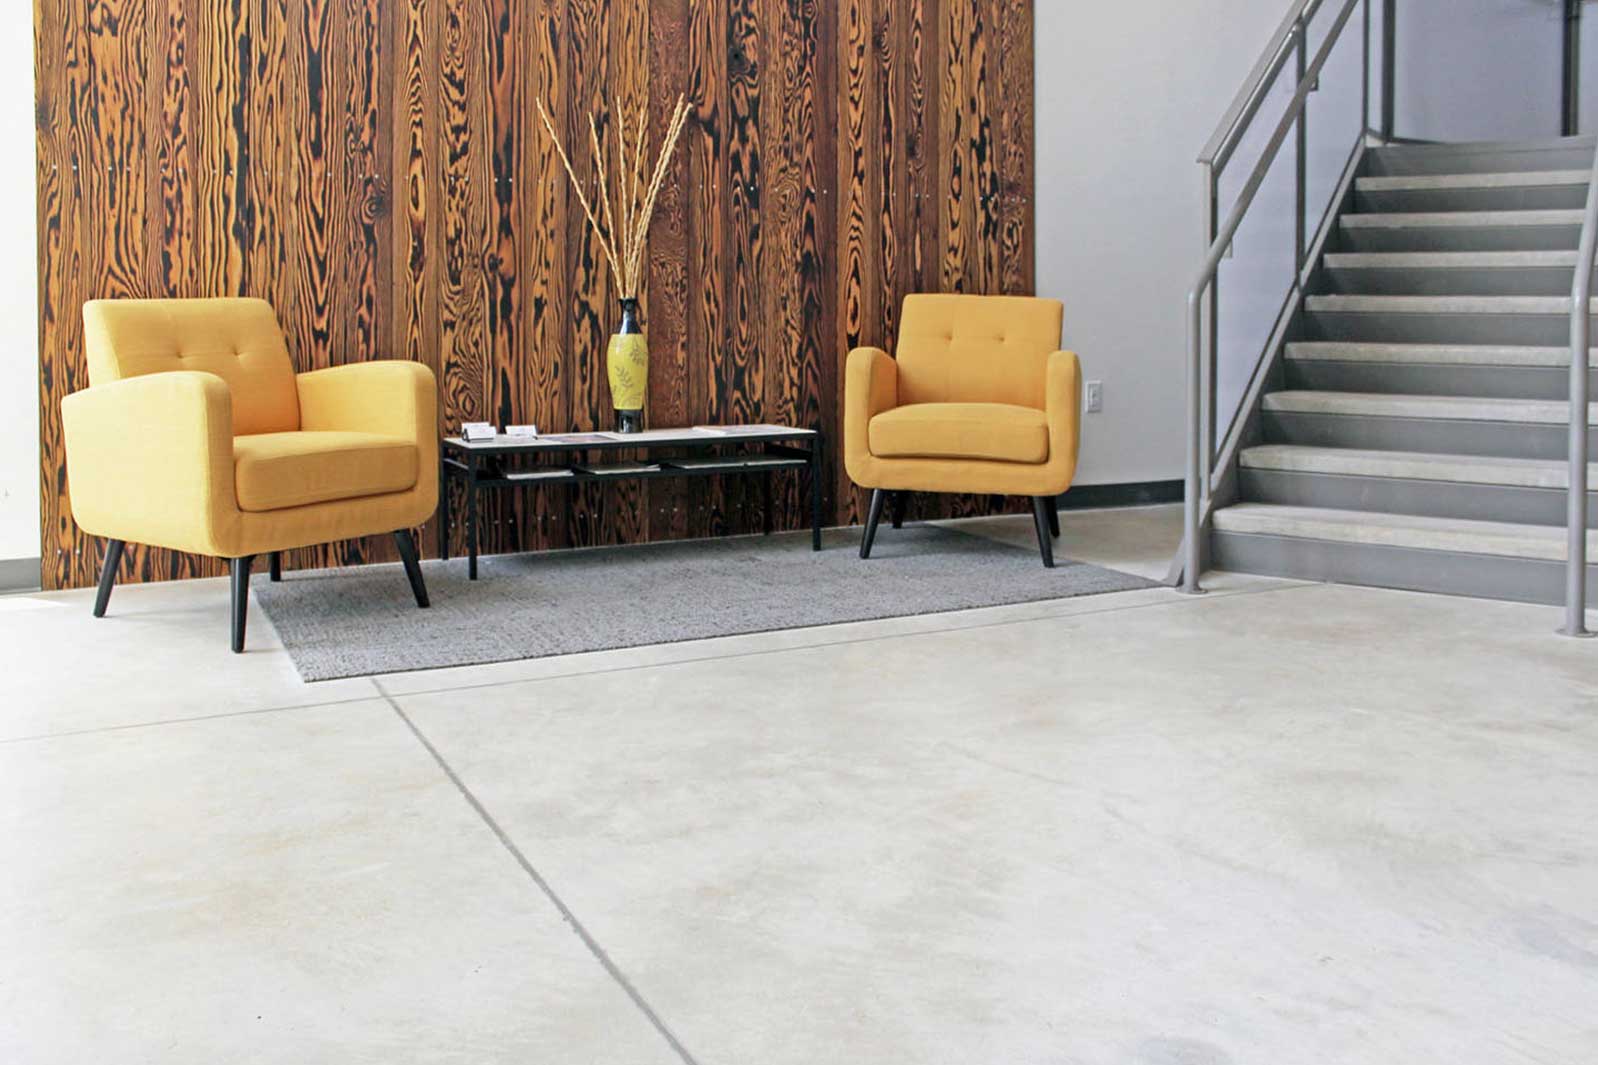 Want to learn more about Polished Concrete Floors?